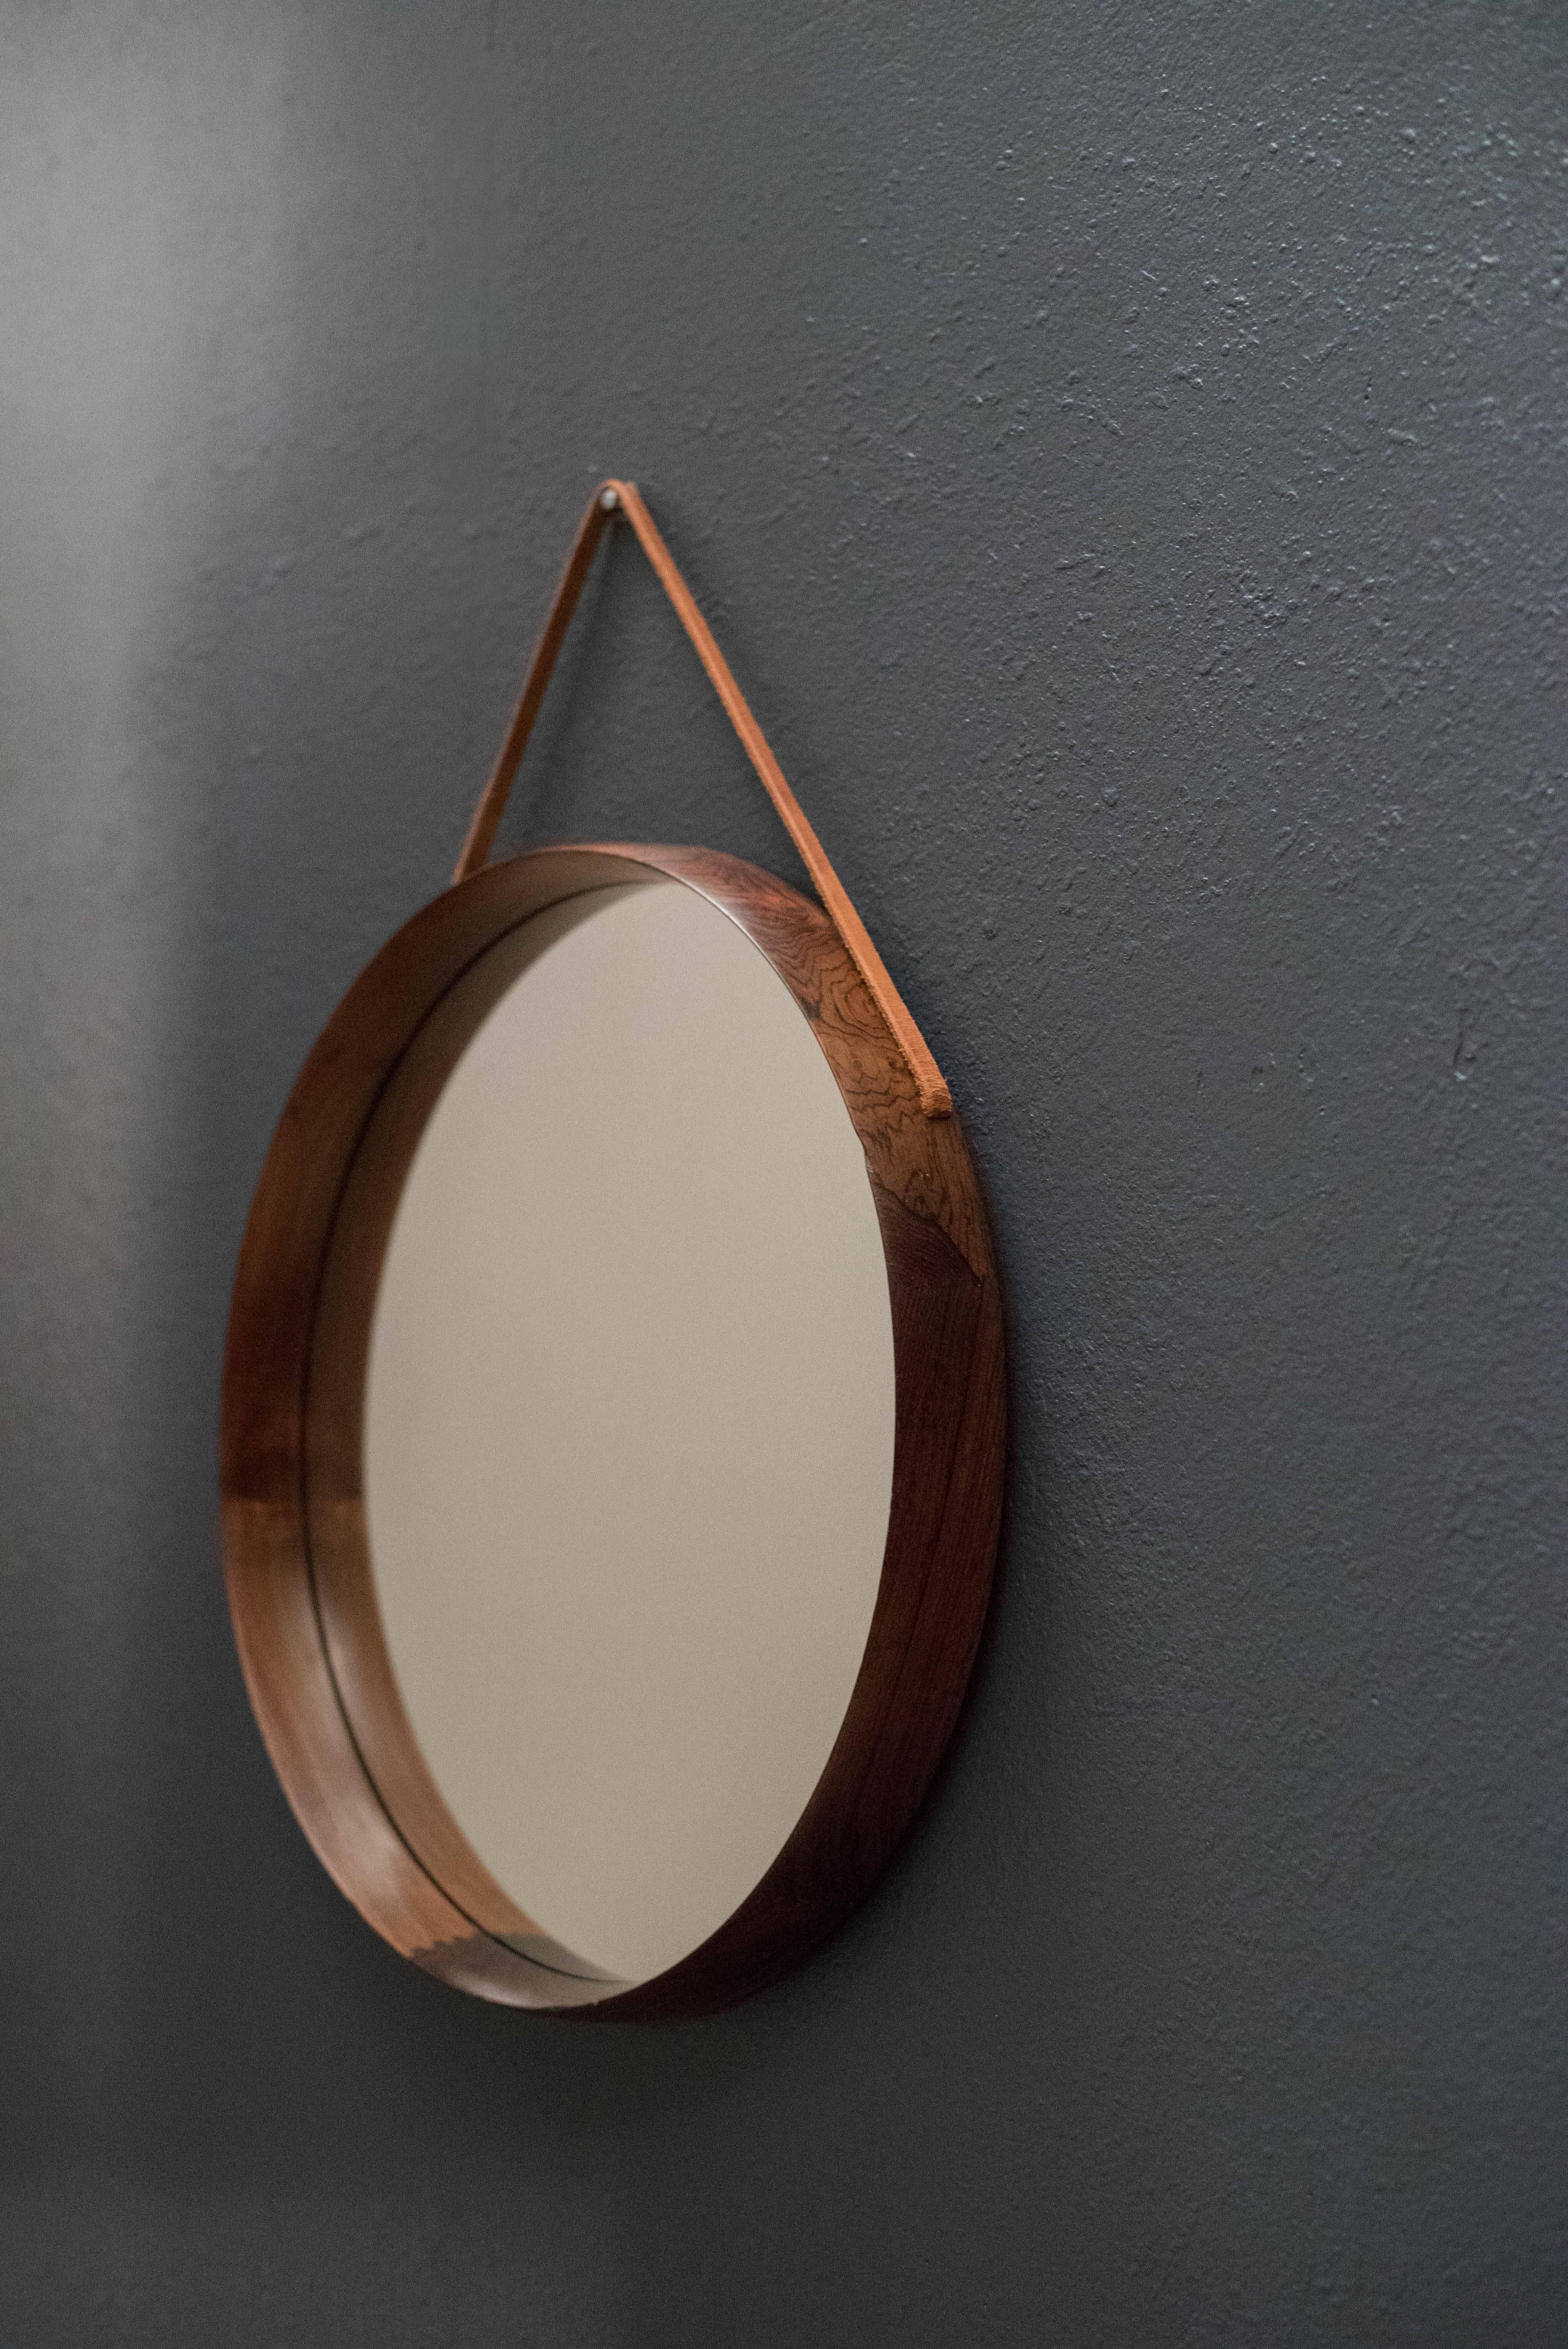 Vintage round mirror designed by Uno & Östen Kristiansson for Luxus of Sweden. This piece is includes a rosewood frame with detailed joinery and a leather hanging strap.

 